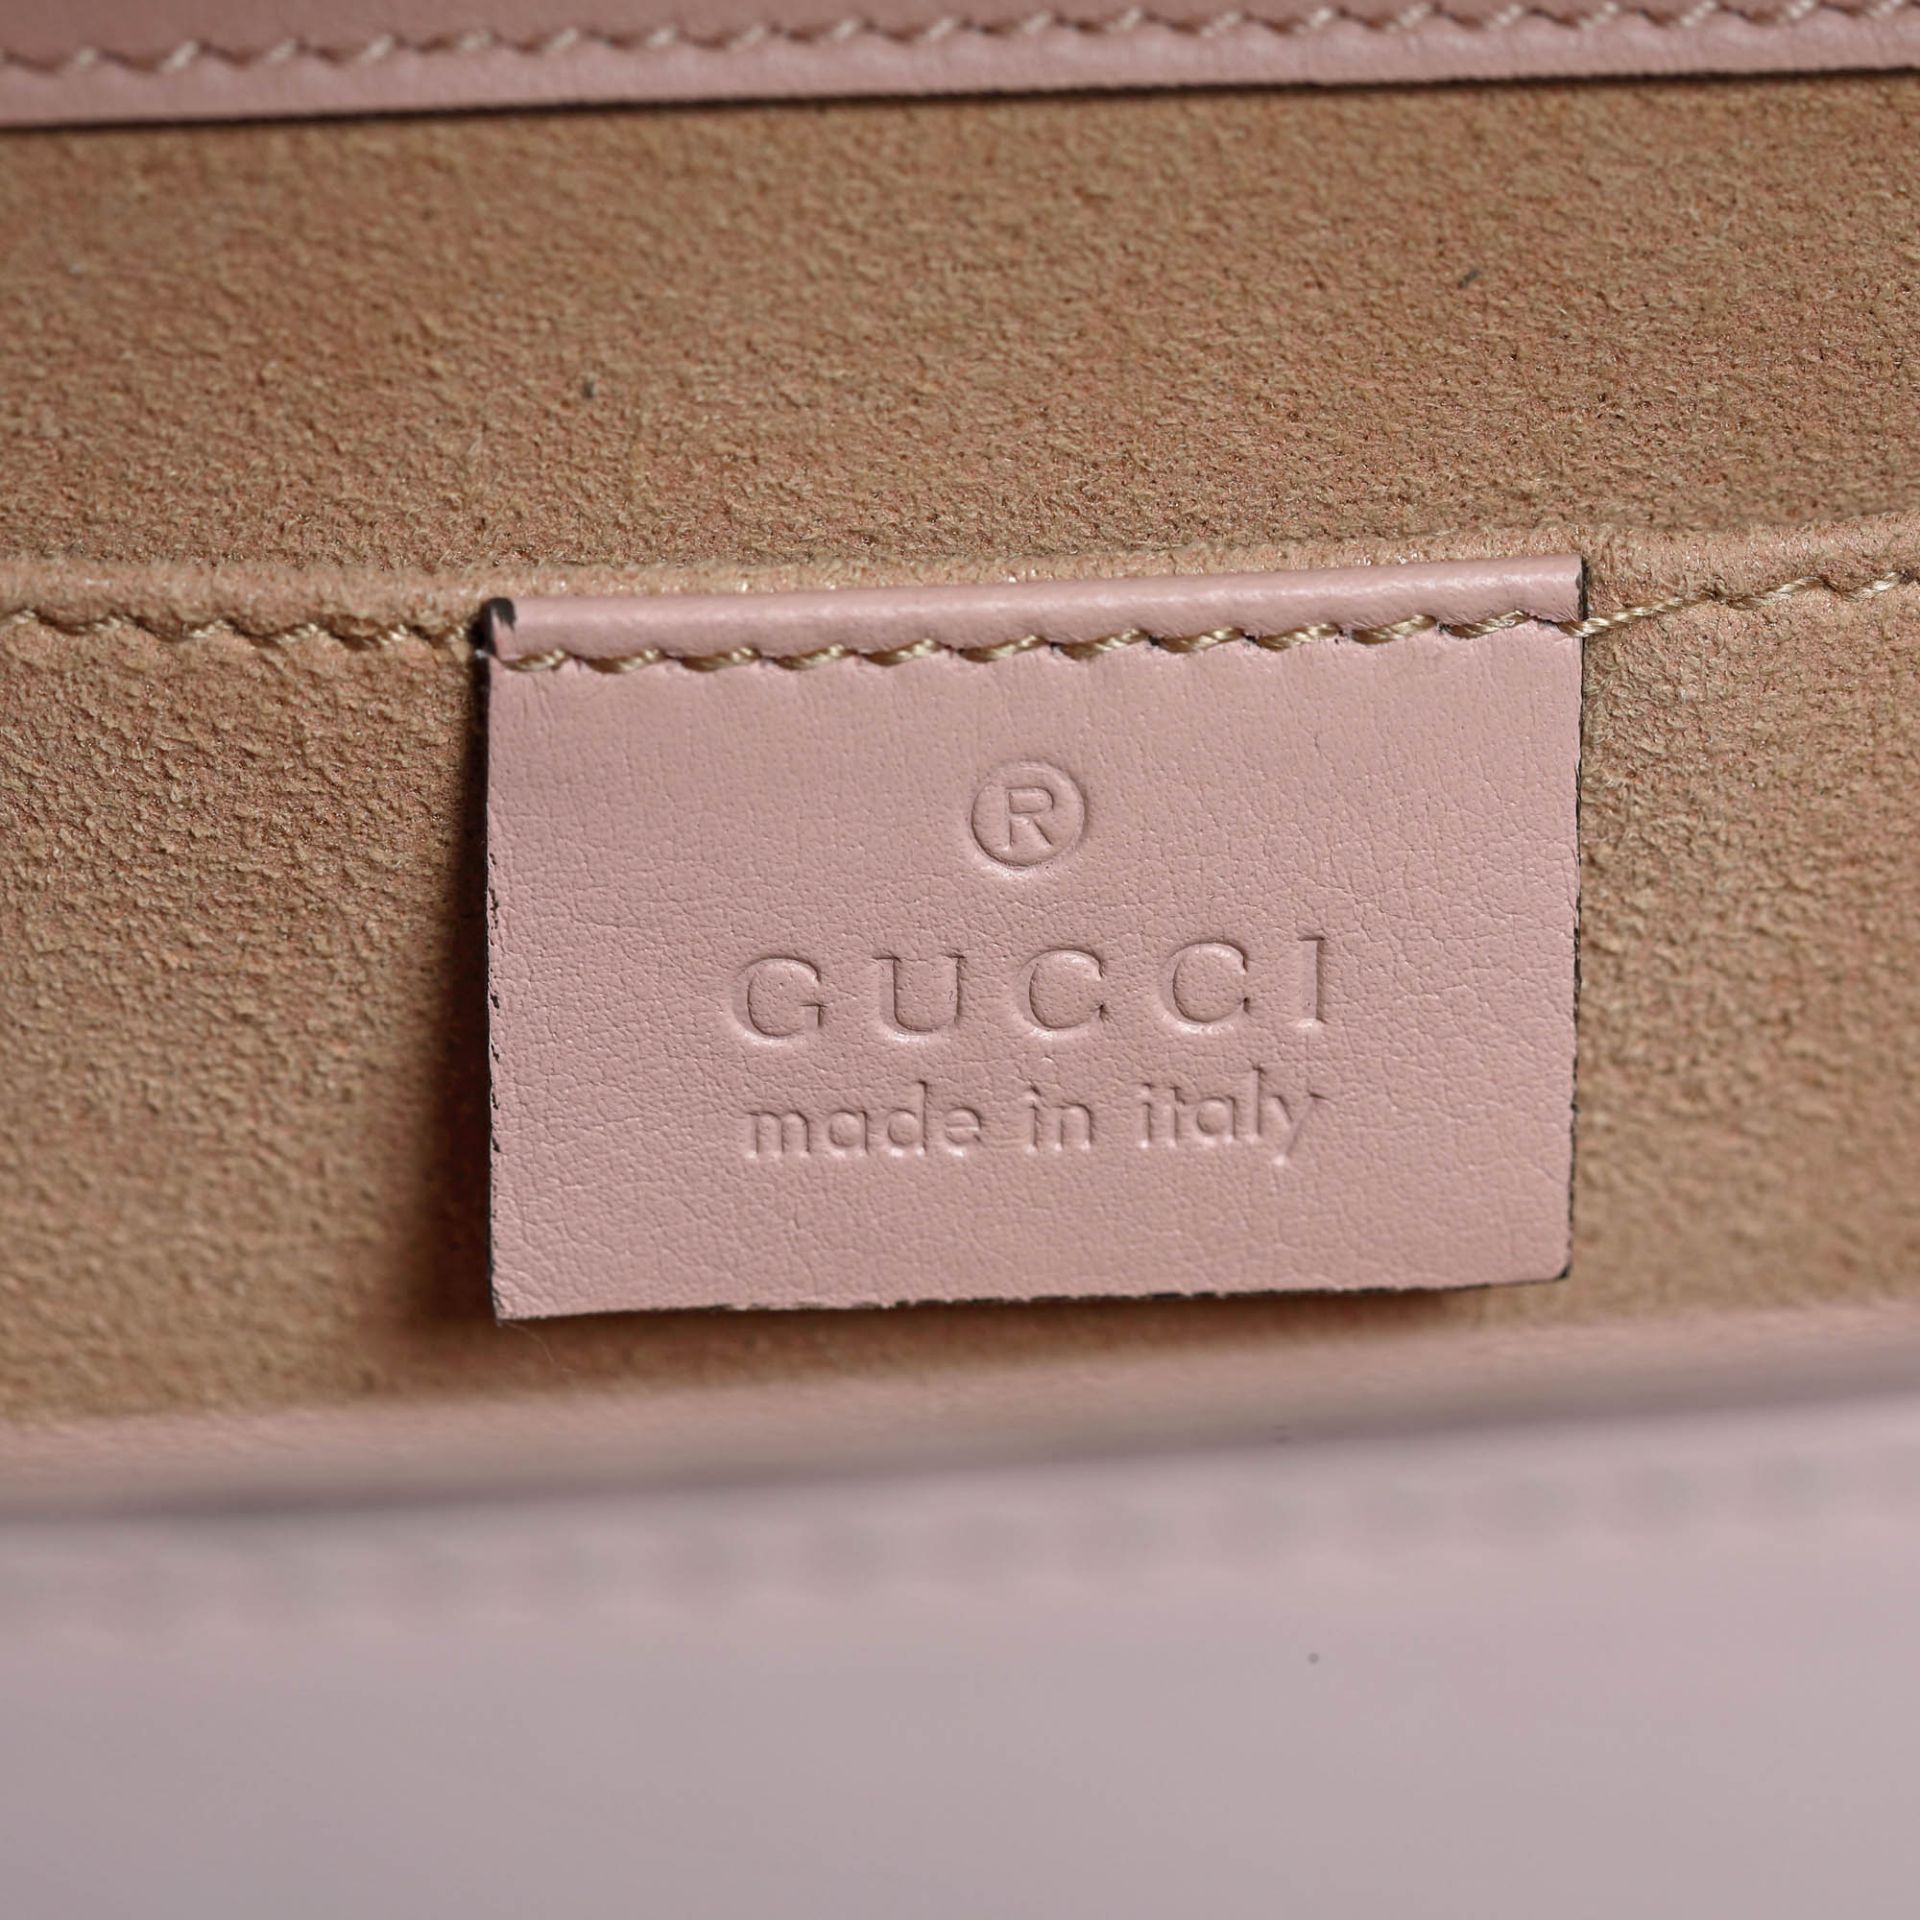 "Padlock" - Gucci bag, leather, pale pink, with applications embroidered in star shapes, for women - Image 3 of 12